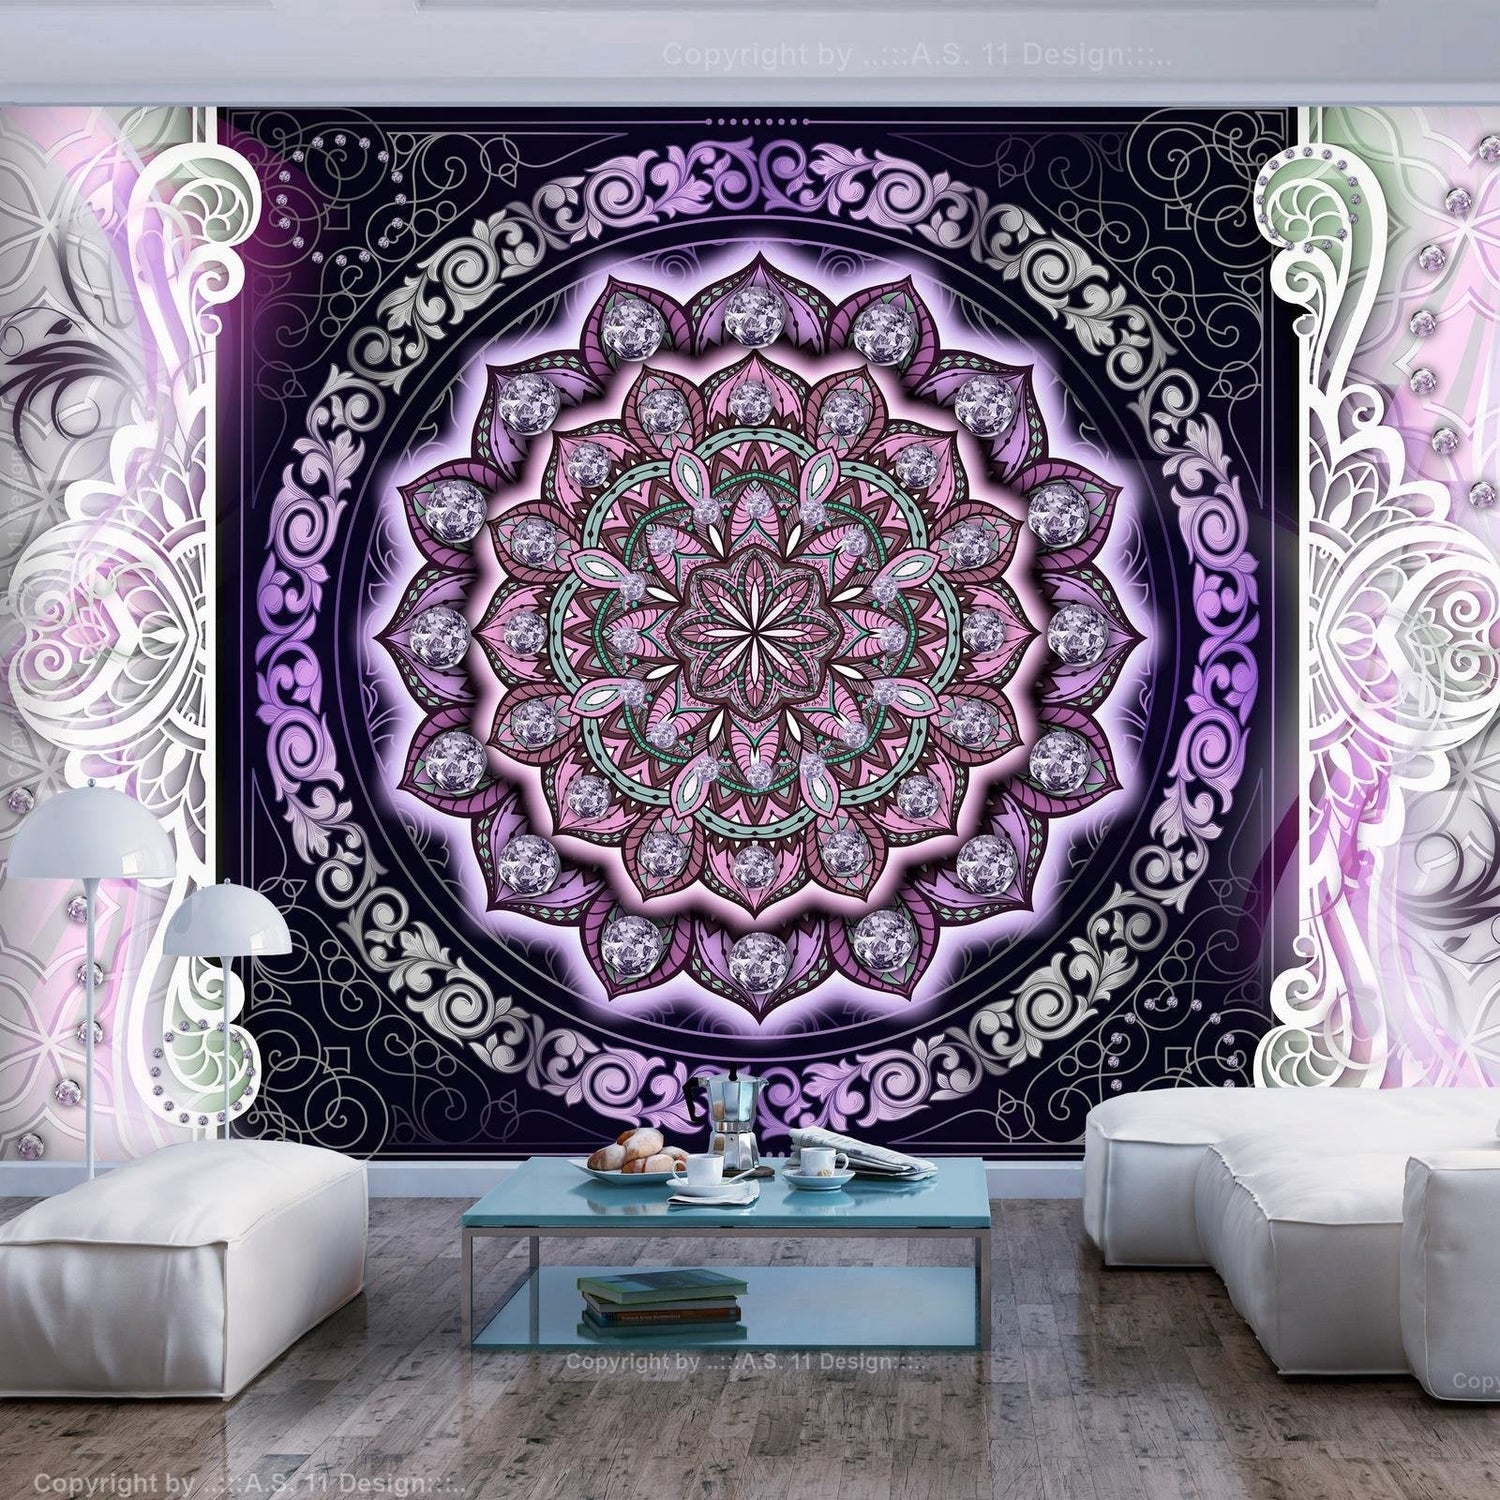 Peel and stick wall mural - Round Stained Glass (Violet)-TipTopHomeDecor